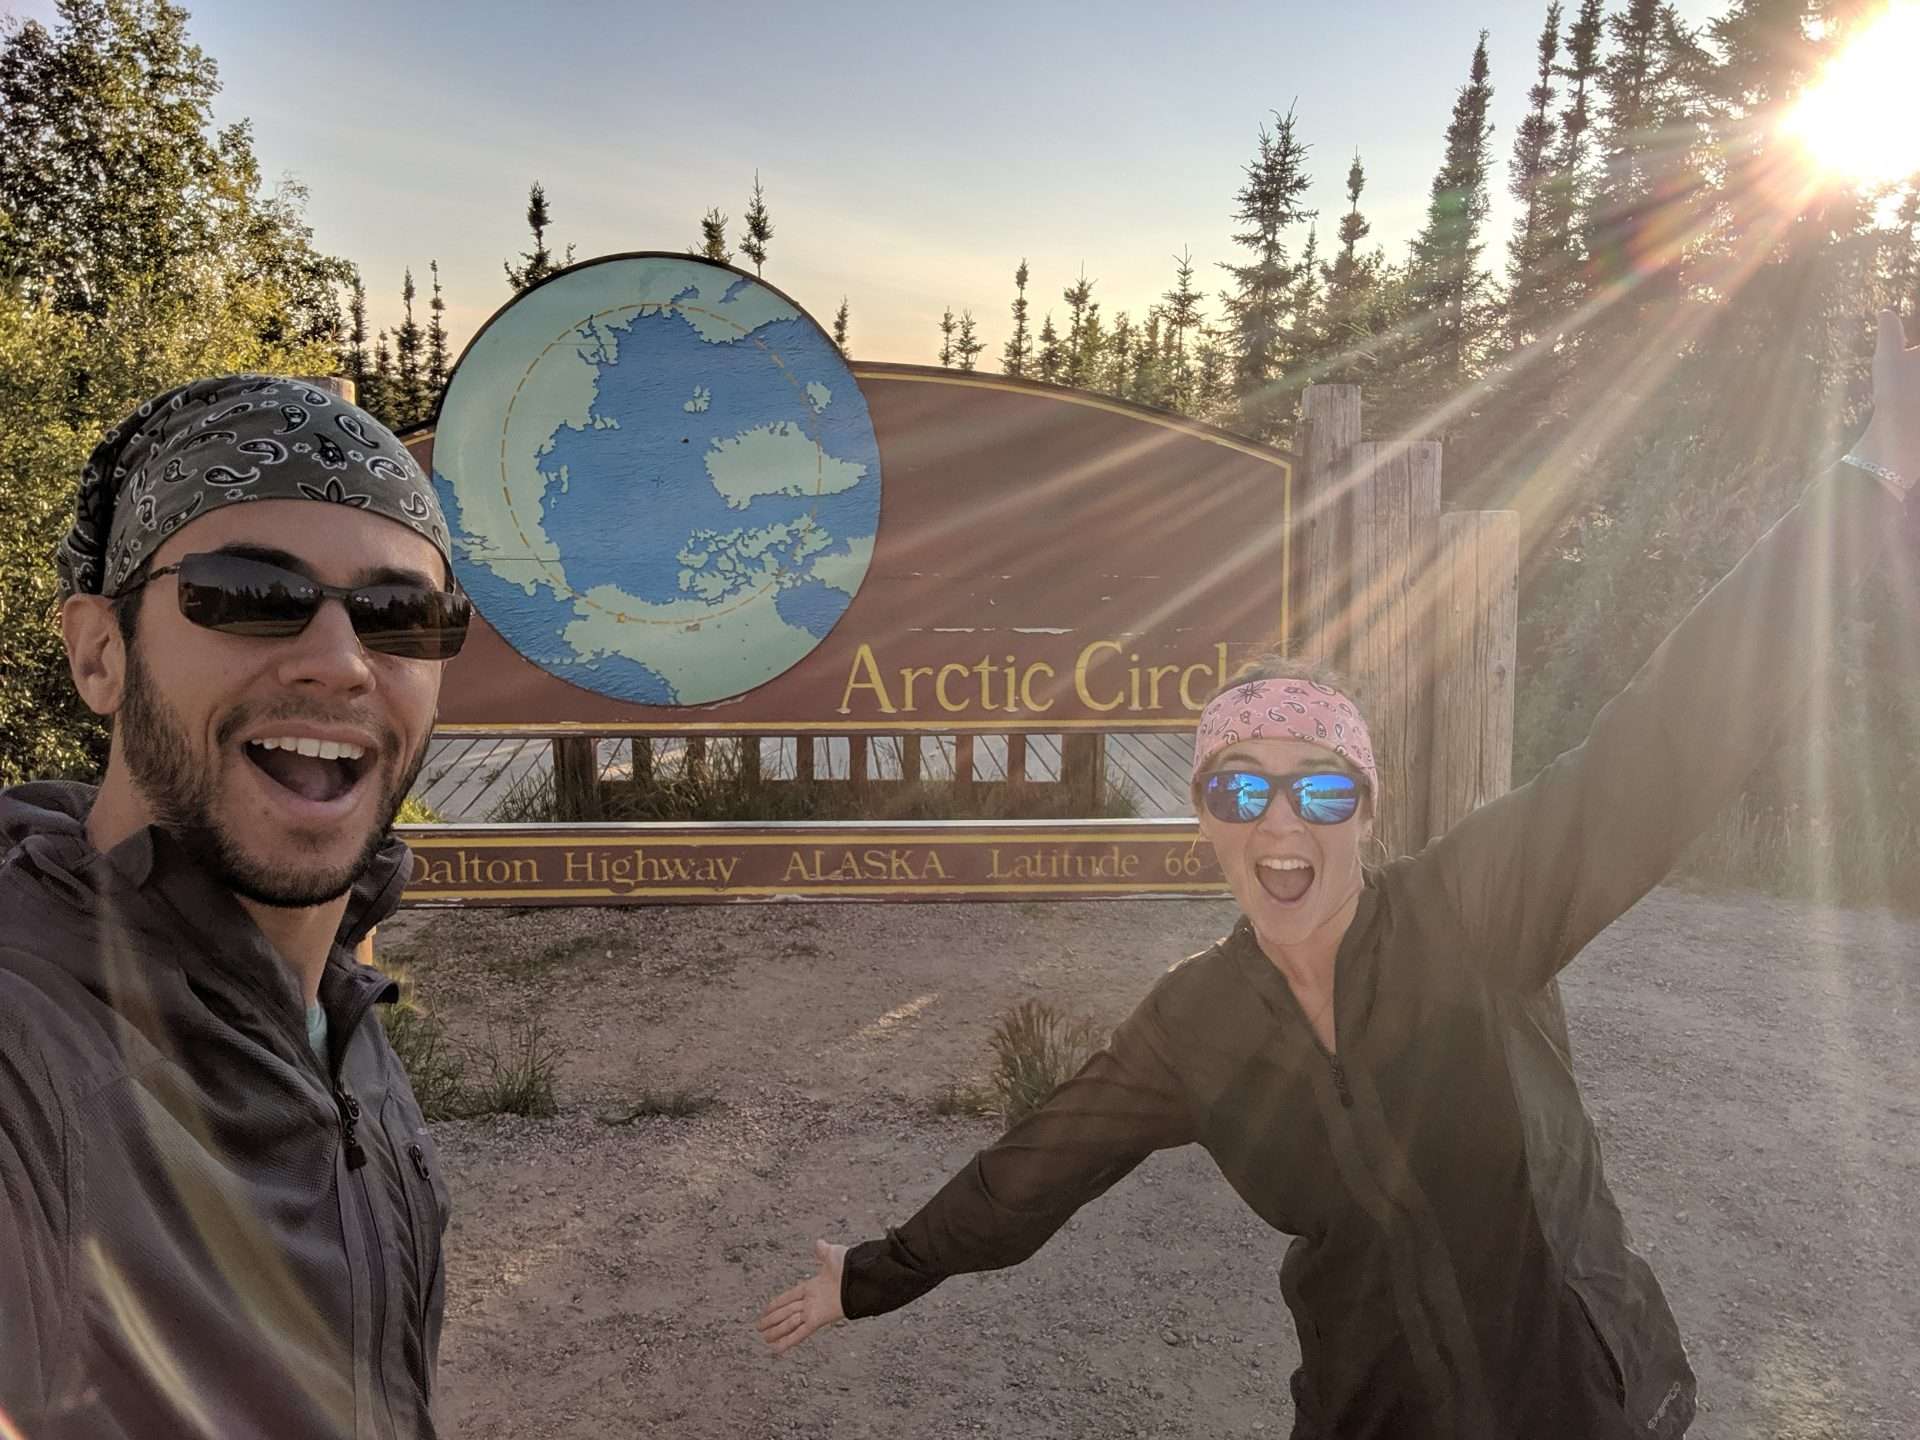 Tom and Cait from Mortons on the Move posing in front of the Arctic Circle entry way sign.